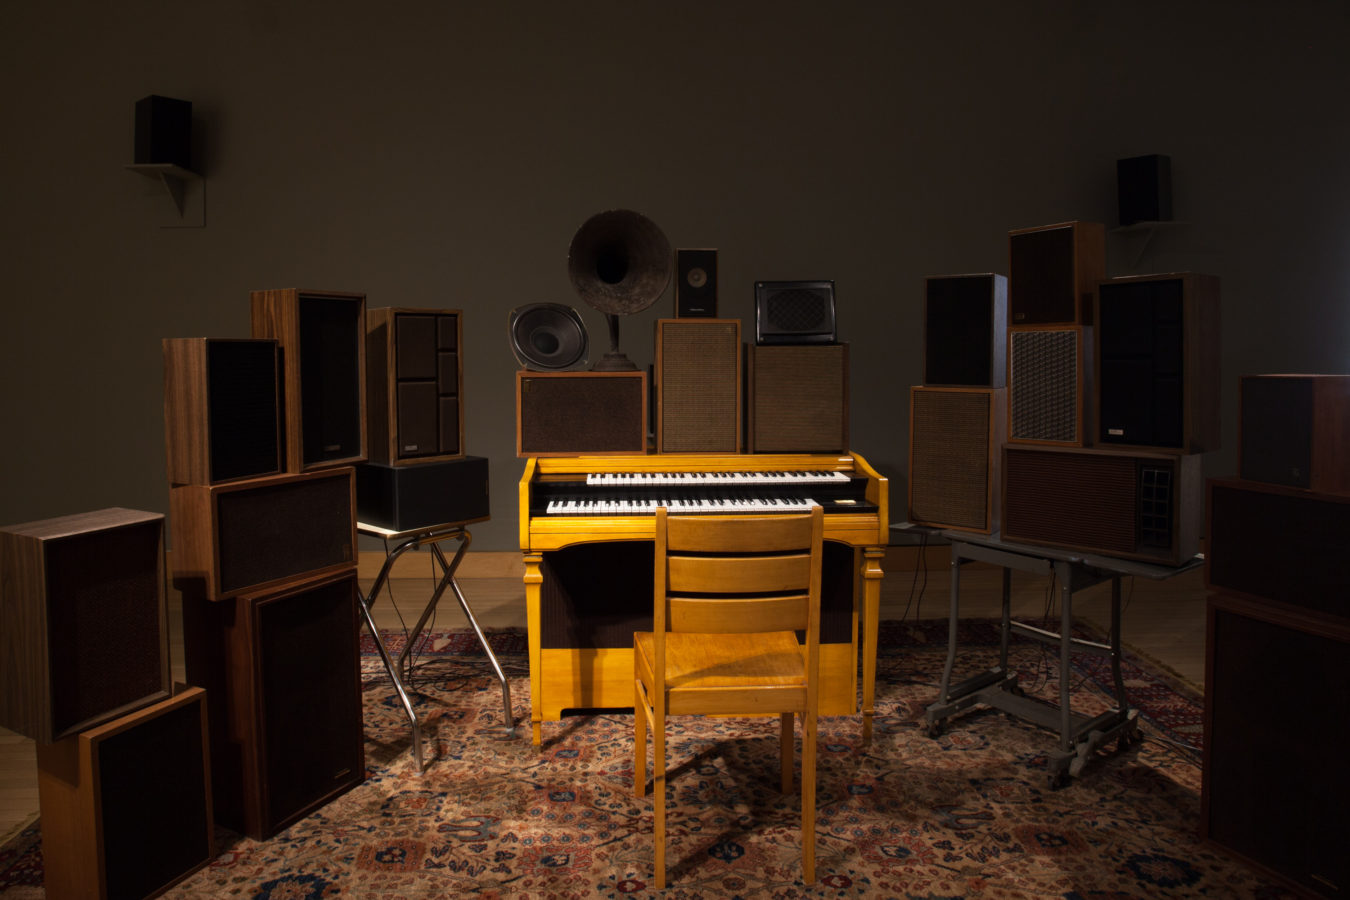 Photograph of an installation of a chair in front of a keyboard, surrounded by multiple stacked speakers